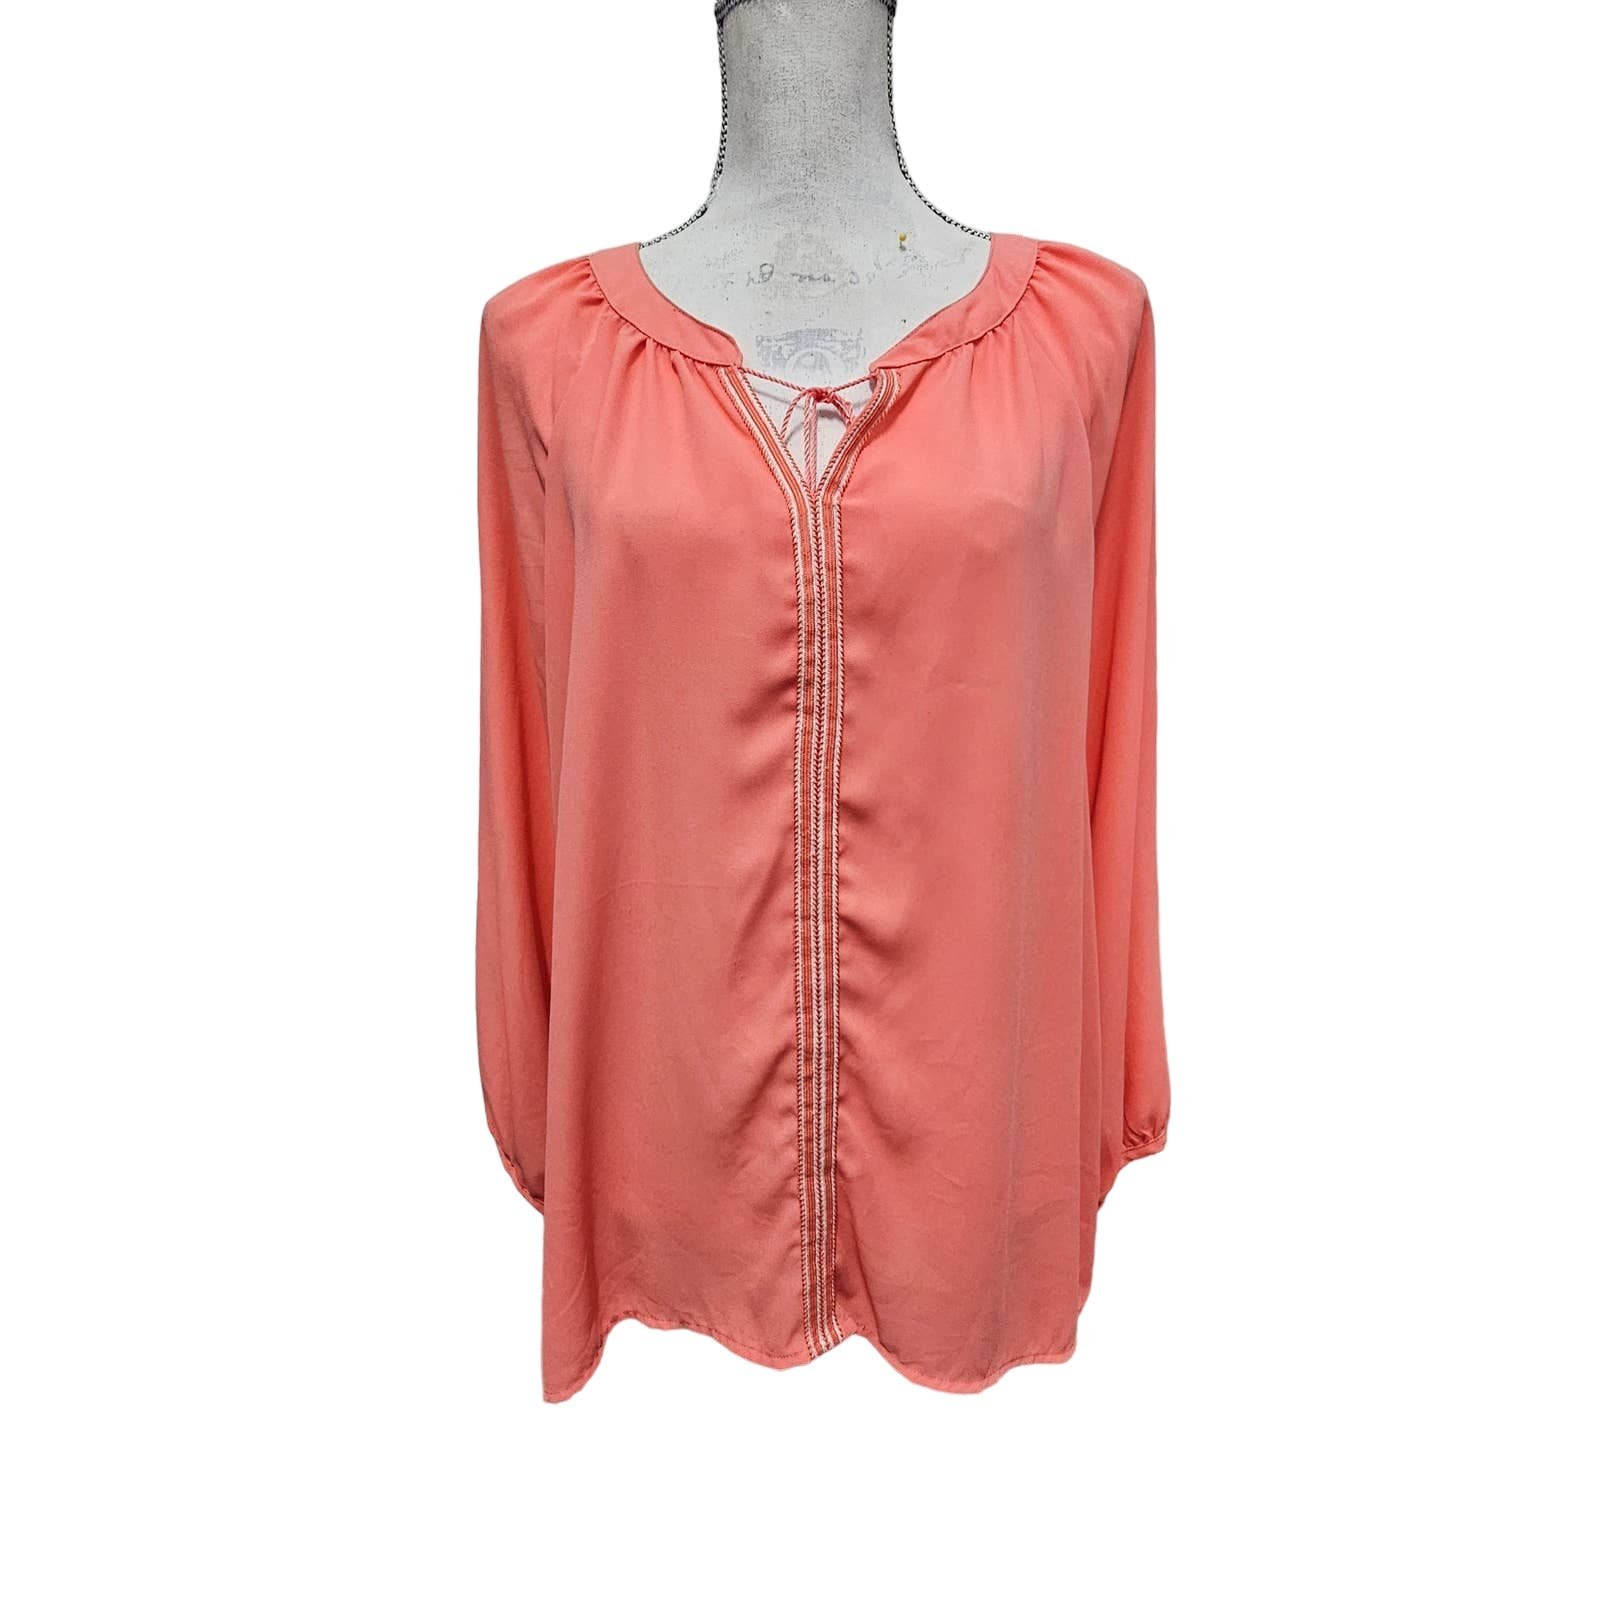 Exclusive Dept222 Coral Long Sleeve Blouse Size L pd5IGUJfR no tax